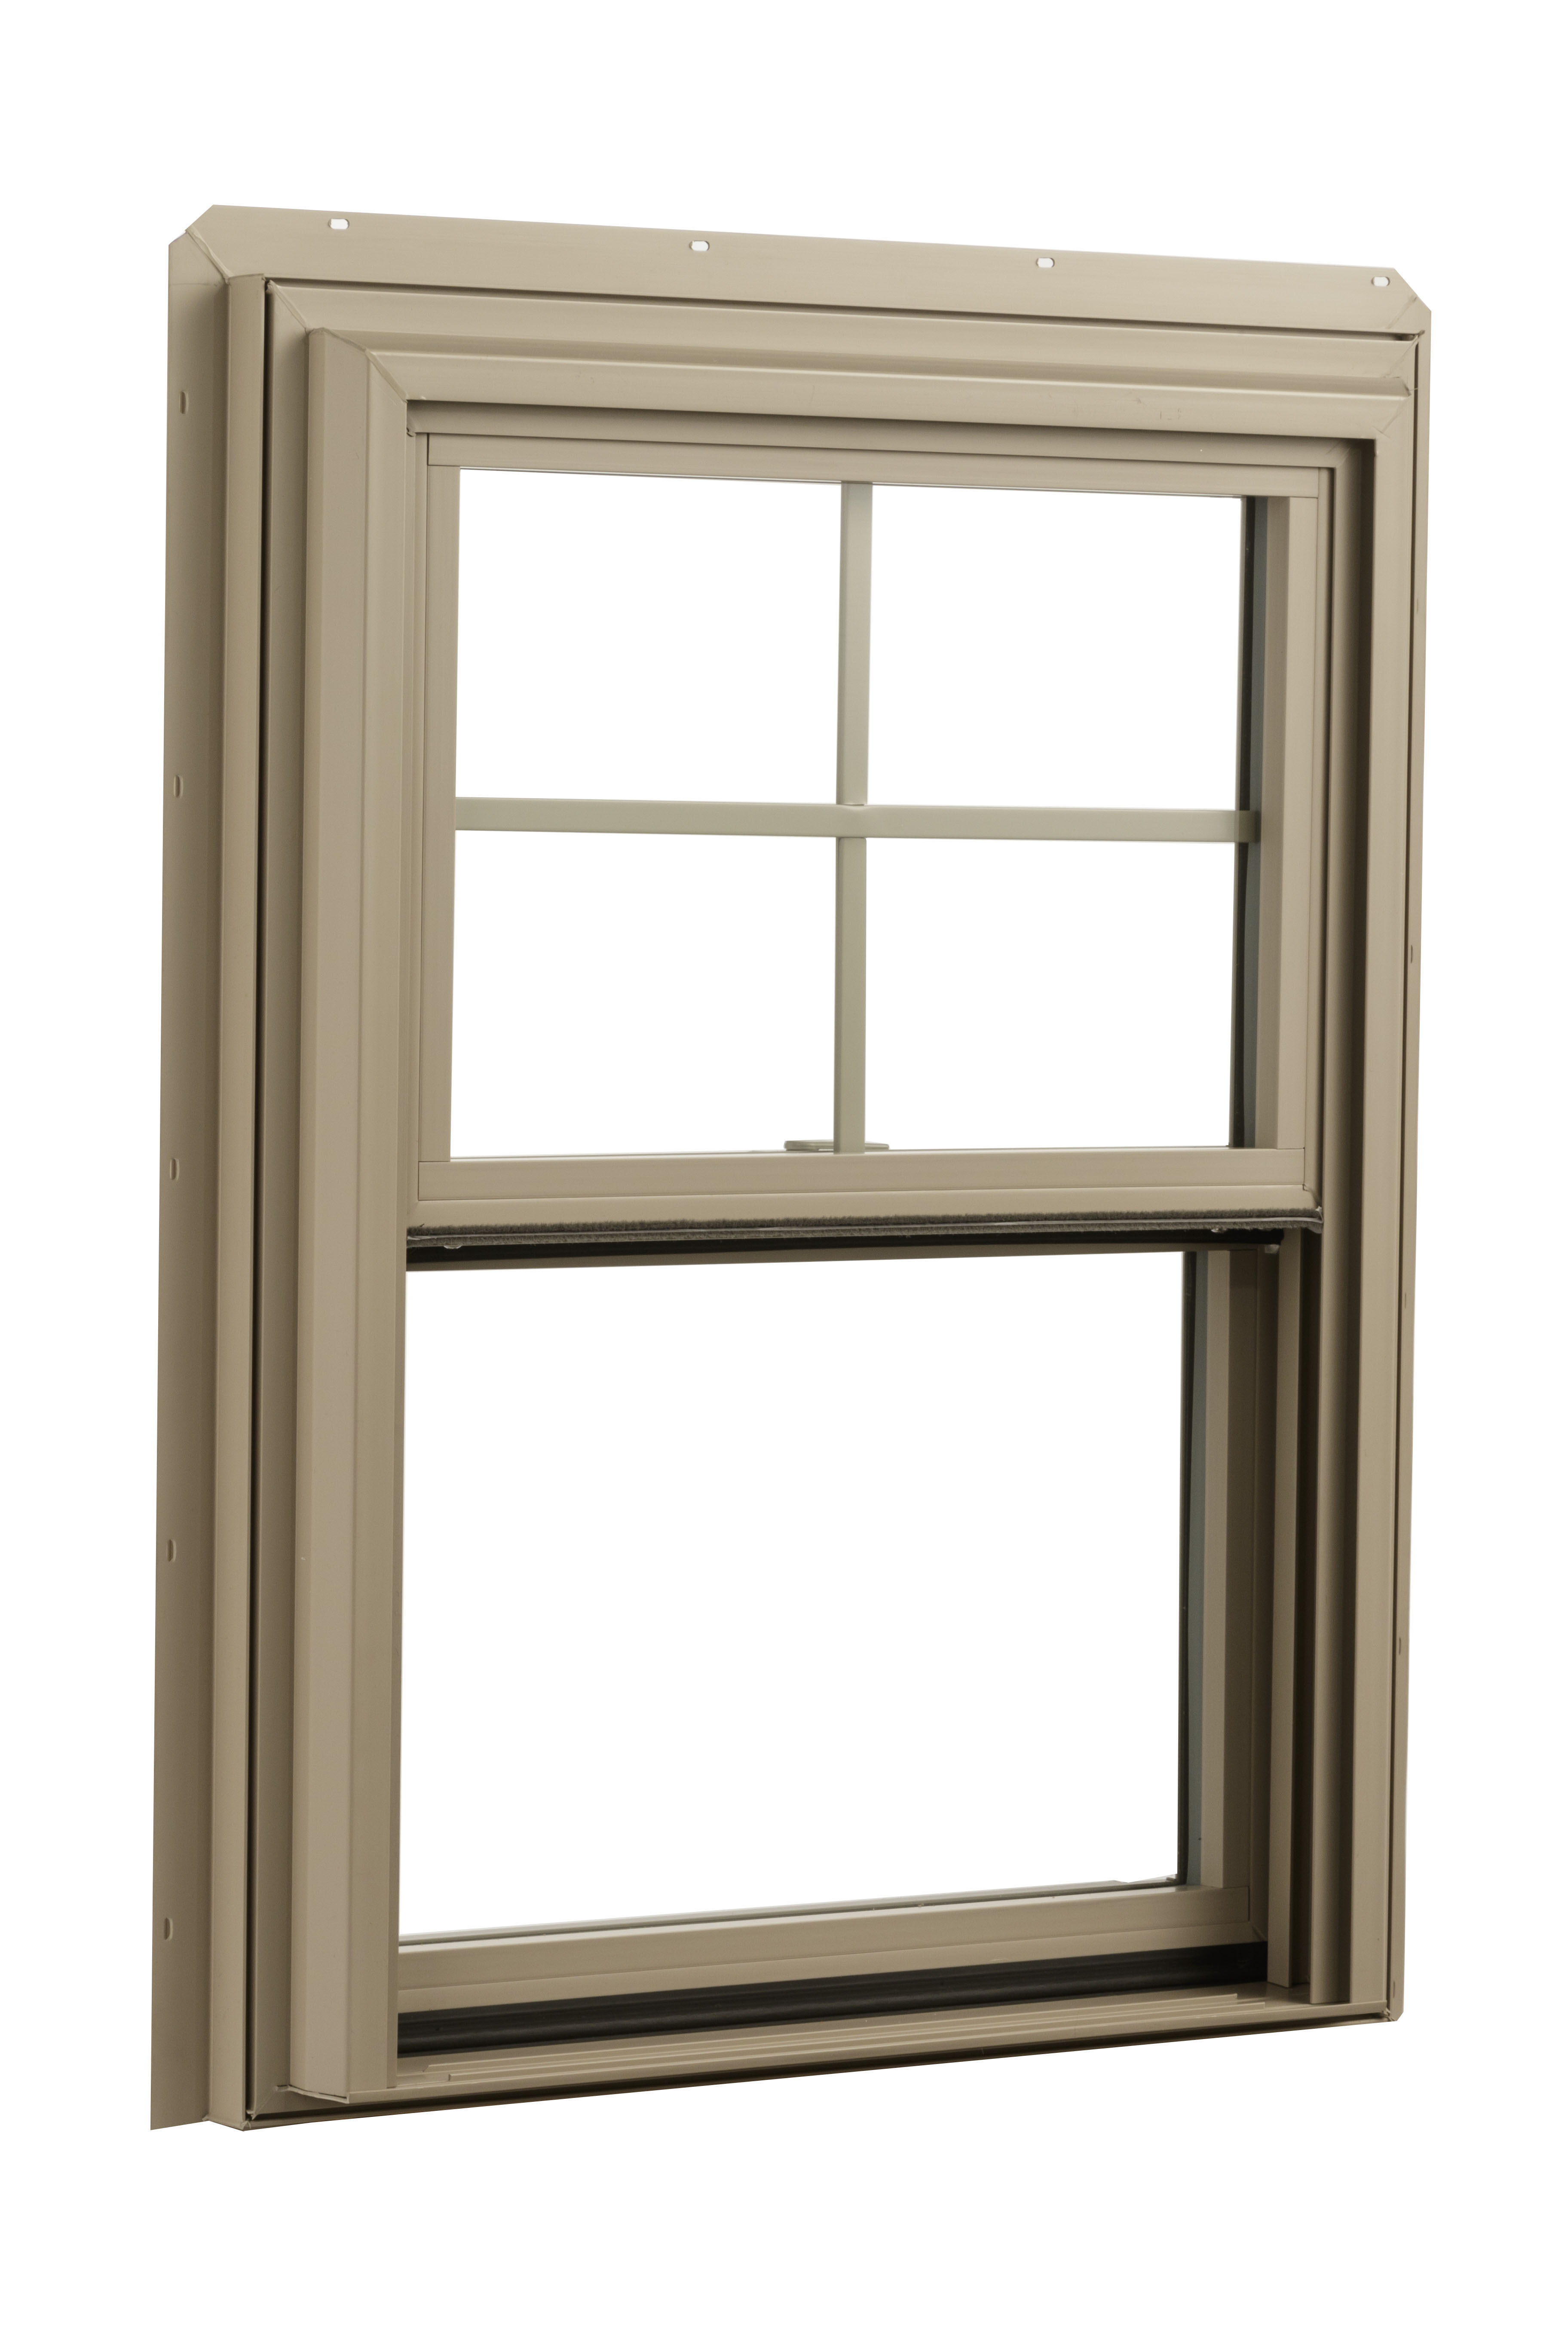 Isolatied shot of an Envision Double Hung Window 